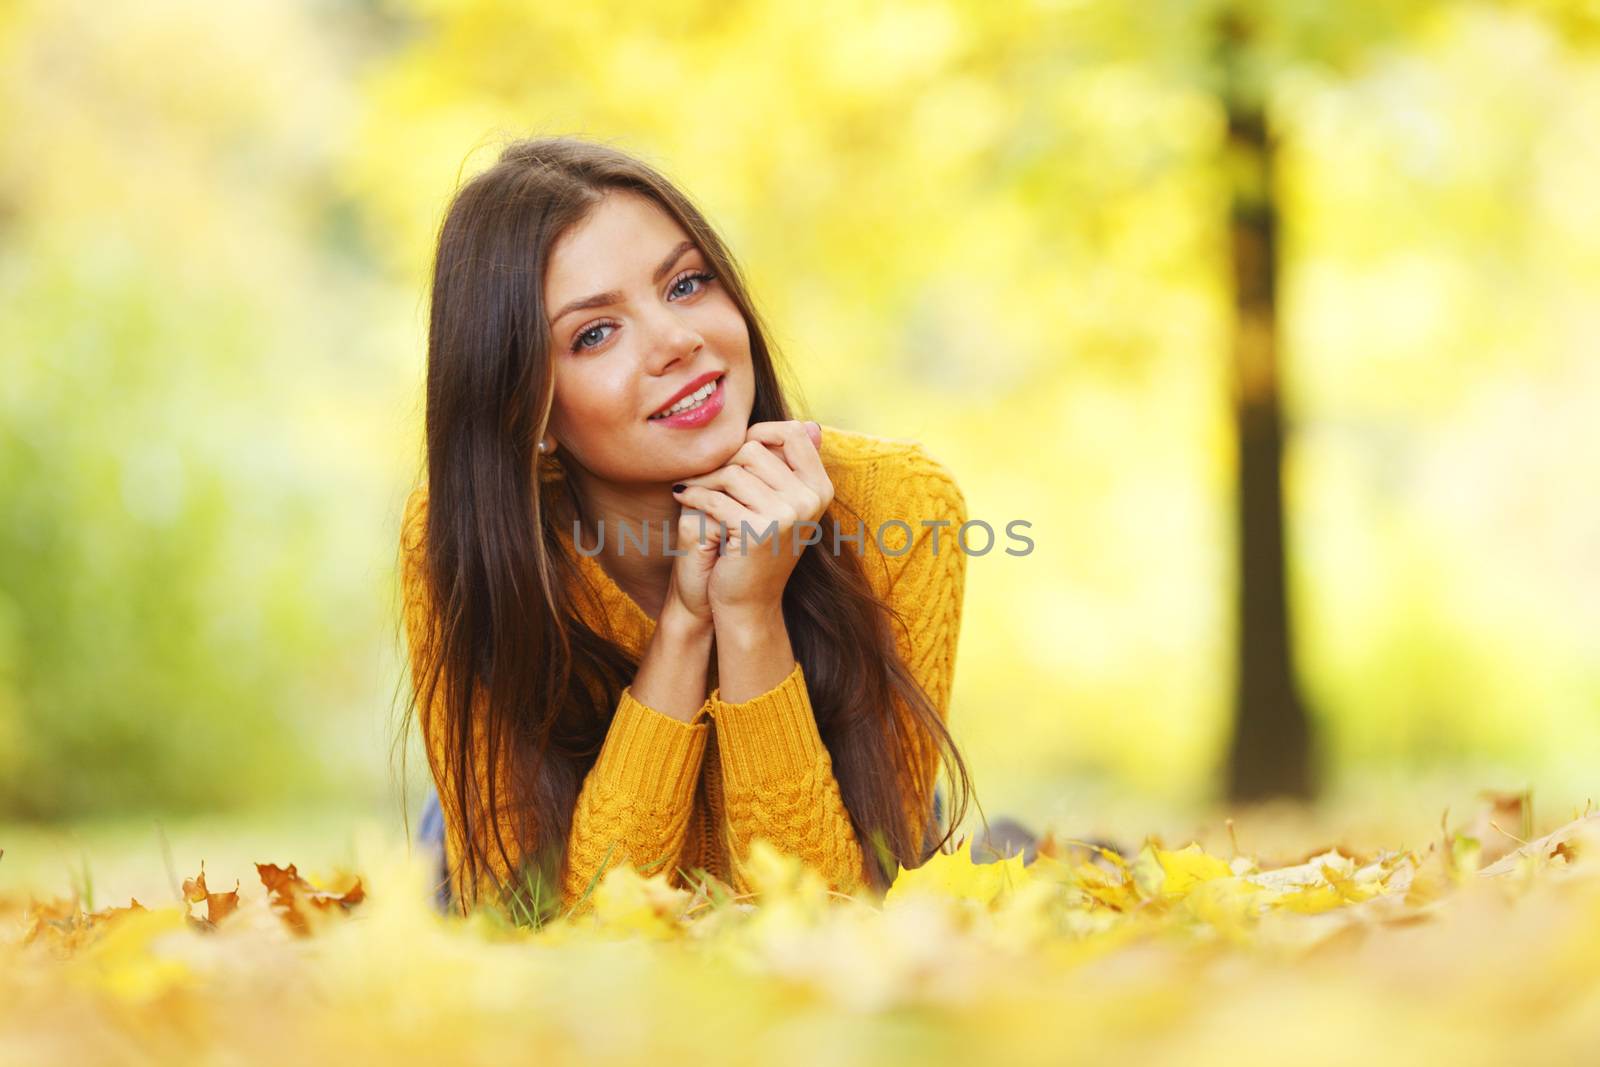 Girl laying on leafs in the autumn park